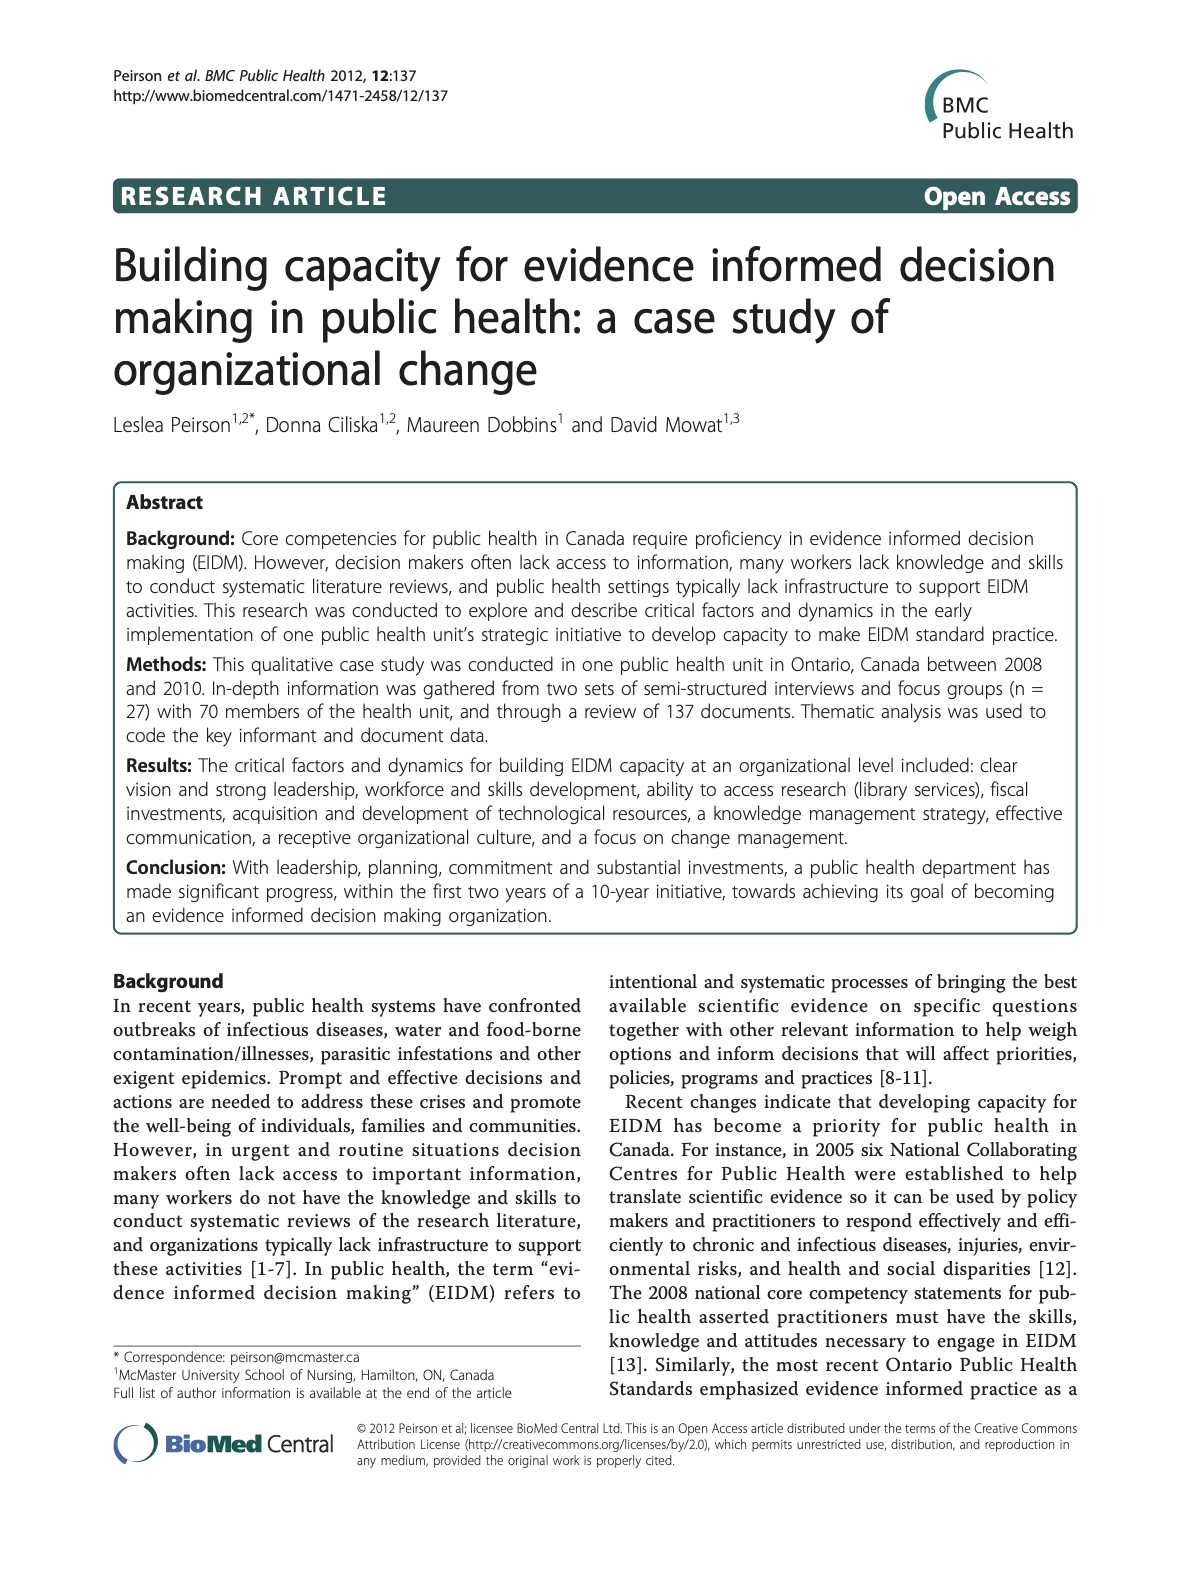 Building Capacity for Evidence Informed Decision Making in Public Health: A Case Study of Organizational Change